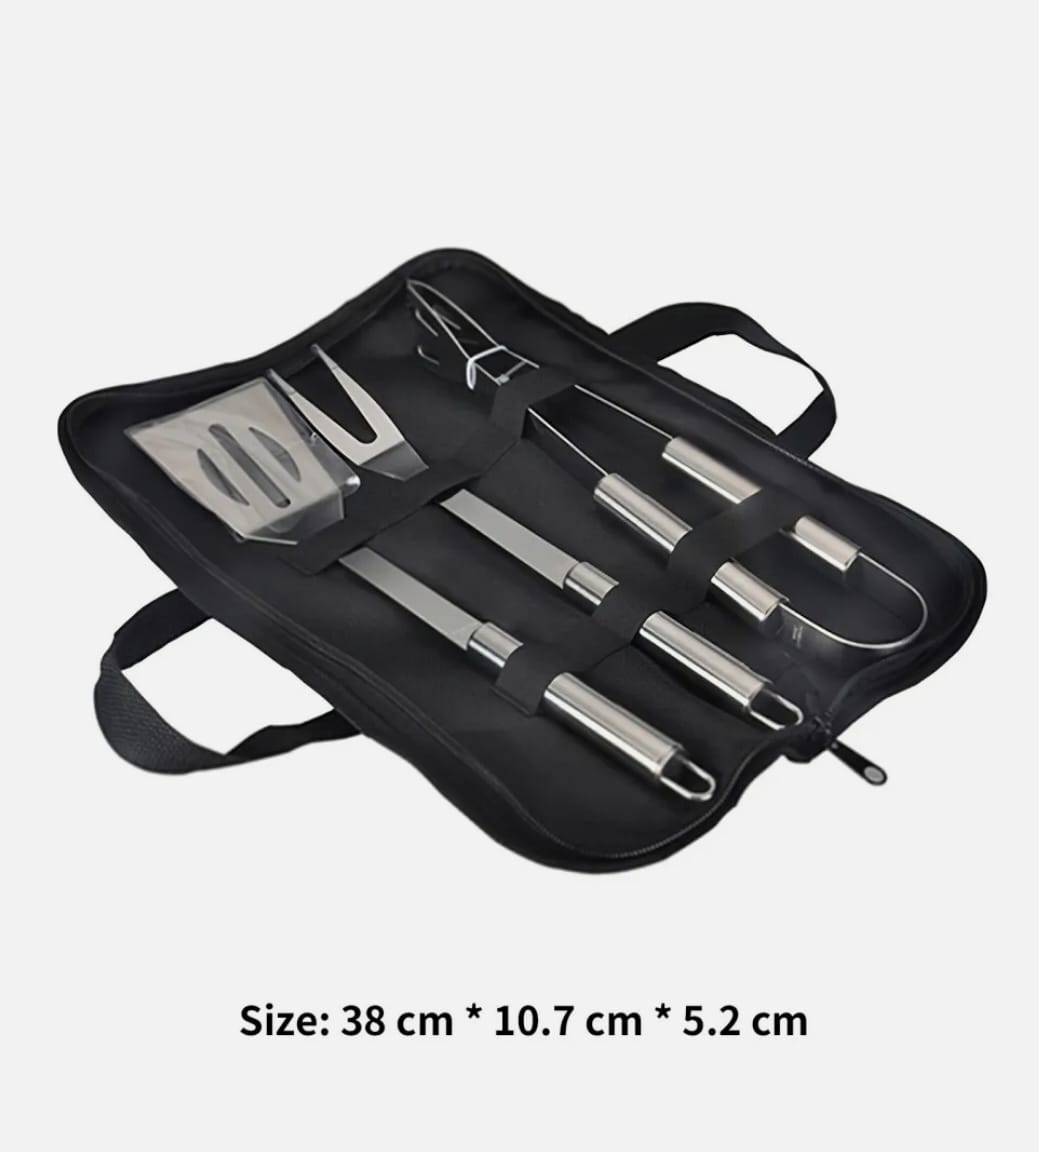 Stainless Steel BBQ Grill Utensils Set Product Size